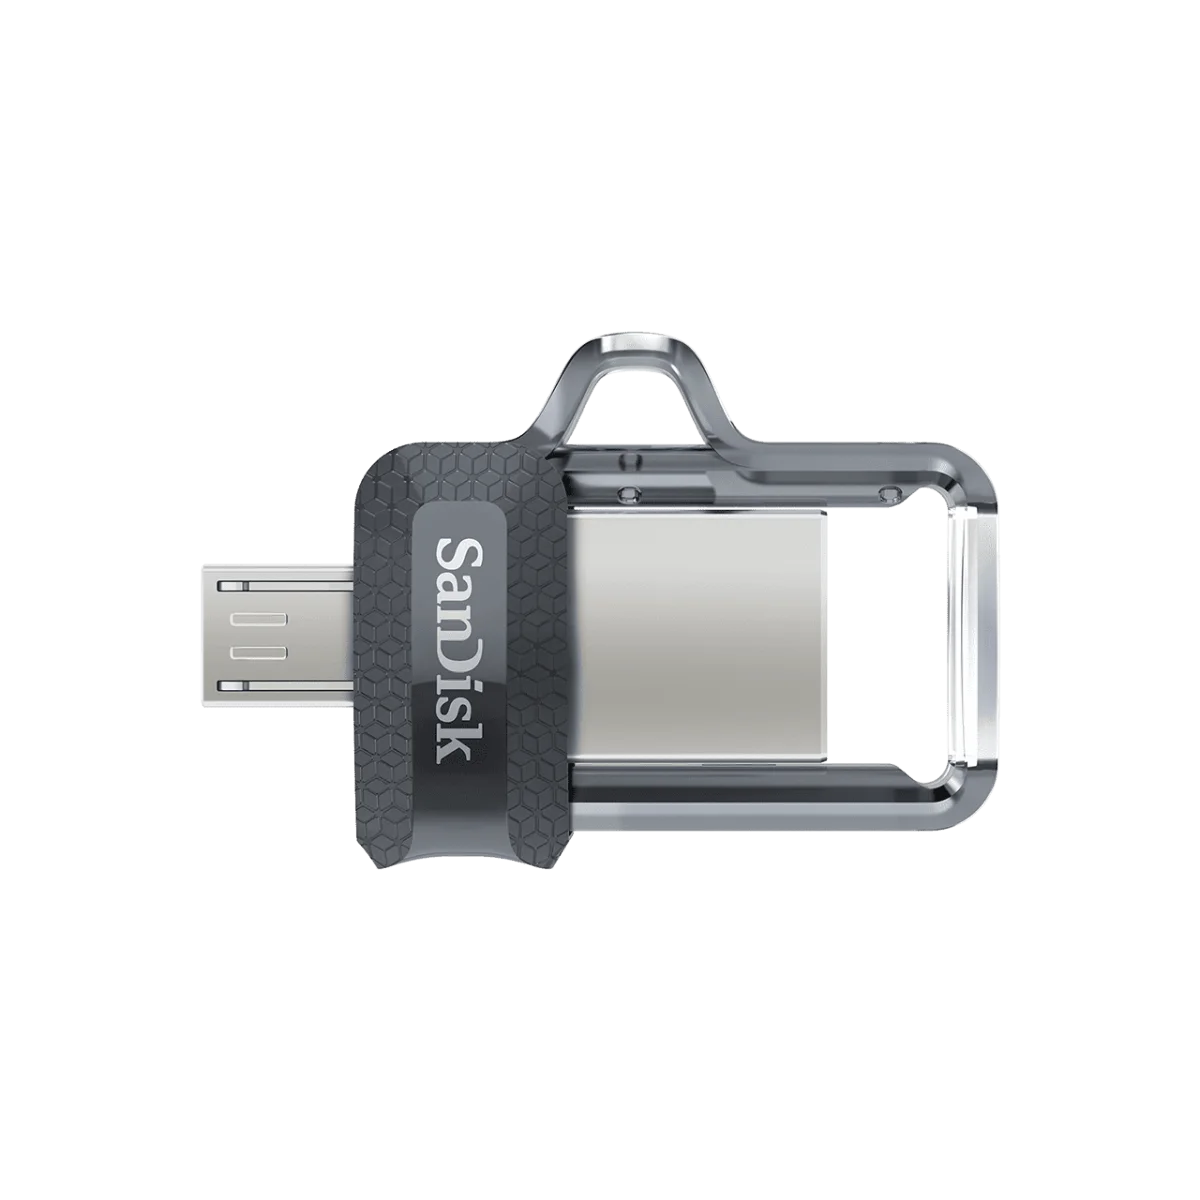 Ultra Dual Drive Usb M 3 Open Top2.Png.thumb .1280.1280 Sandisk &Lt;Div Class=&Quot;Active&Quot; Data-Sku=&Quot;Sddd3-016G-A46&Quot;&Gt; &Lt;H1&Gt;Instantly Free Up Space On Your Android Smartphone&Lt;/H1&Gt; &Lt;Div Class=&Quot;Inheritpara Mb-4&Quot;&Gt; The Sandisk Ultra® Dual Drive M3.0 Makes It Easy To Transfer Content From Your Phone To Your Computer. With A Micro-Usb Connector On One End And A Usb 3.0 Connector On The Other, The Drive Lets You Move Content Easily Between Your Devices—From Your Android™ Smartphone Or Tablet To Your Laptop, Pc Or Mac Computer&Lt;A Class=&Quot;Disclosure&Quot; Href=&Quot;Https://Shop.westerndigital.com/Products/Usb-Flash-Drives/Sandisk-Ultra-Dual-Drive-M30-Usb-3-0-Micro-Usb#Disclosures&Quot; Target=&Quot;_Self&Quot; Rel=&Quot;Noopener Noreferrer&Quot; Aria-Labelledby=&Quot;Disclosures&Quot;&Gt;&Lt;Sup&Gt;1&Lt;/Sup&Gt;&Lt;/A&Gt;. The Usb 3.0 Connector Is High-Performance And Backward-Compatible With Usb 2.0 Ports. The Sandisk® Memory Zone App&Lt;A Class=&Quot;Disclosure&Quot; Href=&Quot;Https://Shop.westerndigital.com/Products/Usb-Flash-Drives/Sandisk-Ultra-Dual-Drive-M30-Usb-3-0-Micro-Usb#Disclosures&Quot; Target=&Quot;_Self&Quot; Rel=&Quot;Noopener Noreferrer&Quot; Aria-Labelledby=&Quot;Disclosures&Quot;&Gt;&Lt;Sup&Gt;2&Lt;/Sup&Gt;&Lt;/A&Gt; For Android (Available On Google Play) Helps You Manage Your Device’s Memory And Your Content. &Lt;Strong&Gt;Warranty&Lt;/Strong&Gt; The Sandisk Ultra Flair Usb 3.0 Flash Drive Is Backed By A Five-Year Manufacturer Warranty&Lt;A Class=&Quot;Disclosure&Quot; Href=&Quot;Https://Shop.westerndigital.com/Products/Usb-Flash-Drives/Sandisk-Ultra-Flair-Usb-3-0#Disclosures&Quot; Target=&Quot;_Self&Quot; Rel=&Quot;Noopener Noreferrer&Quot; Aria-Labelledby=&Quot;Disclosures&Quot;&Gt;&Lt;Sup&Gt;2&Lt;/Sup&Gt;&Lt;/A&Gt; &Lt;/Div&Gt; &Lt;/Div&Gt; Sandisk Ultra Dual Drive M3.0 Flash Drive For Android Smartphones (16Gb)